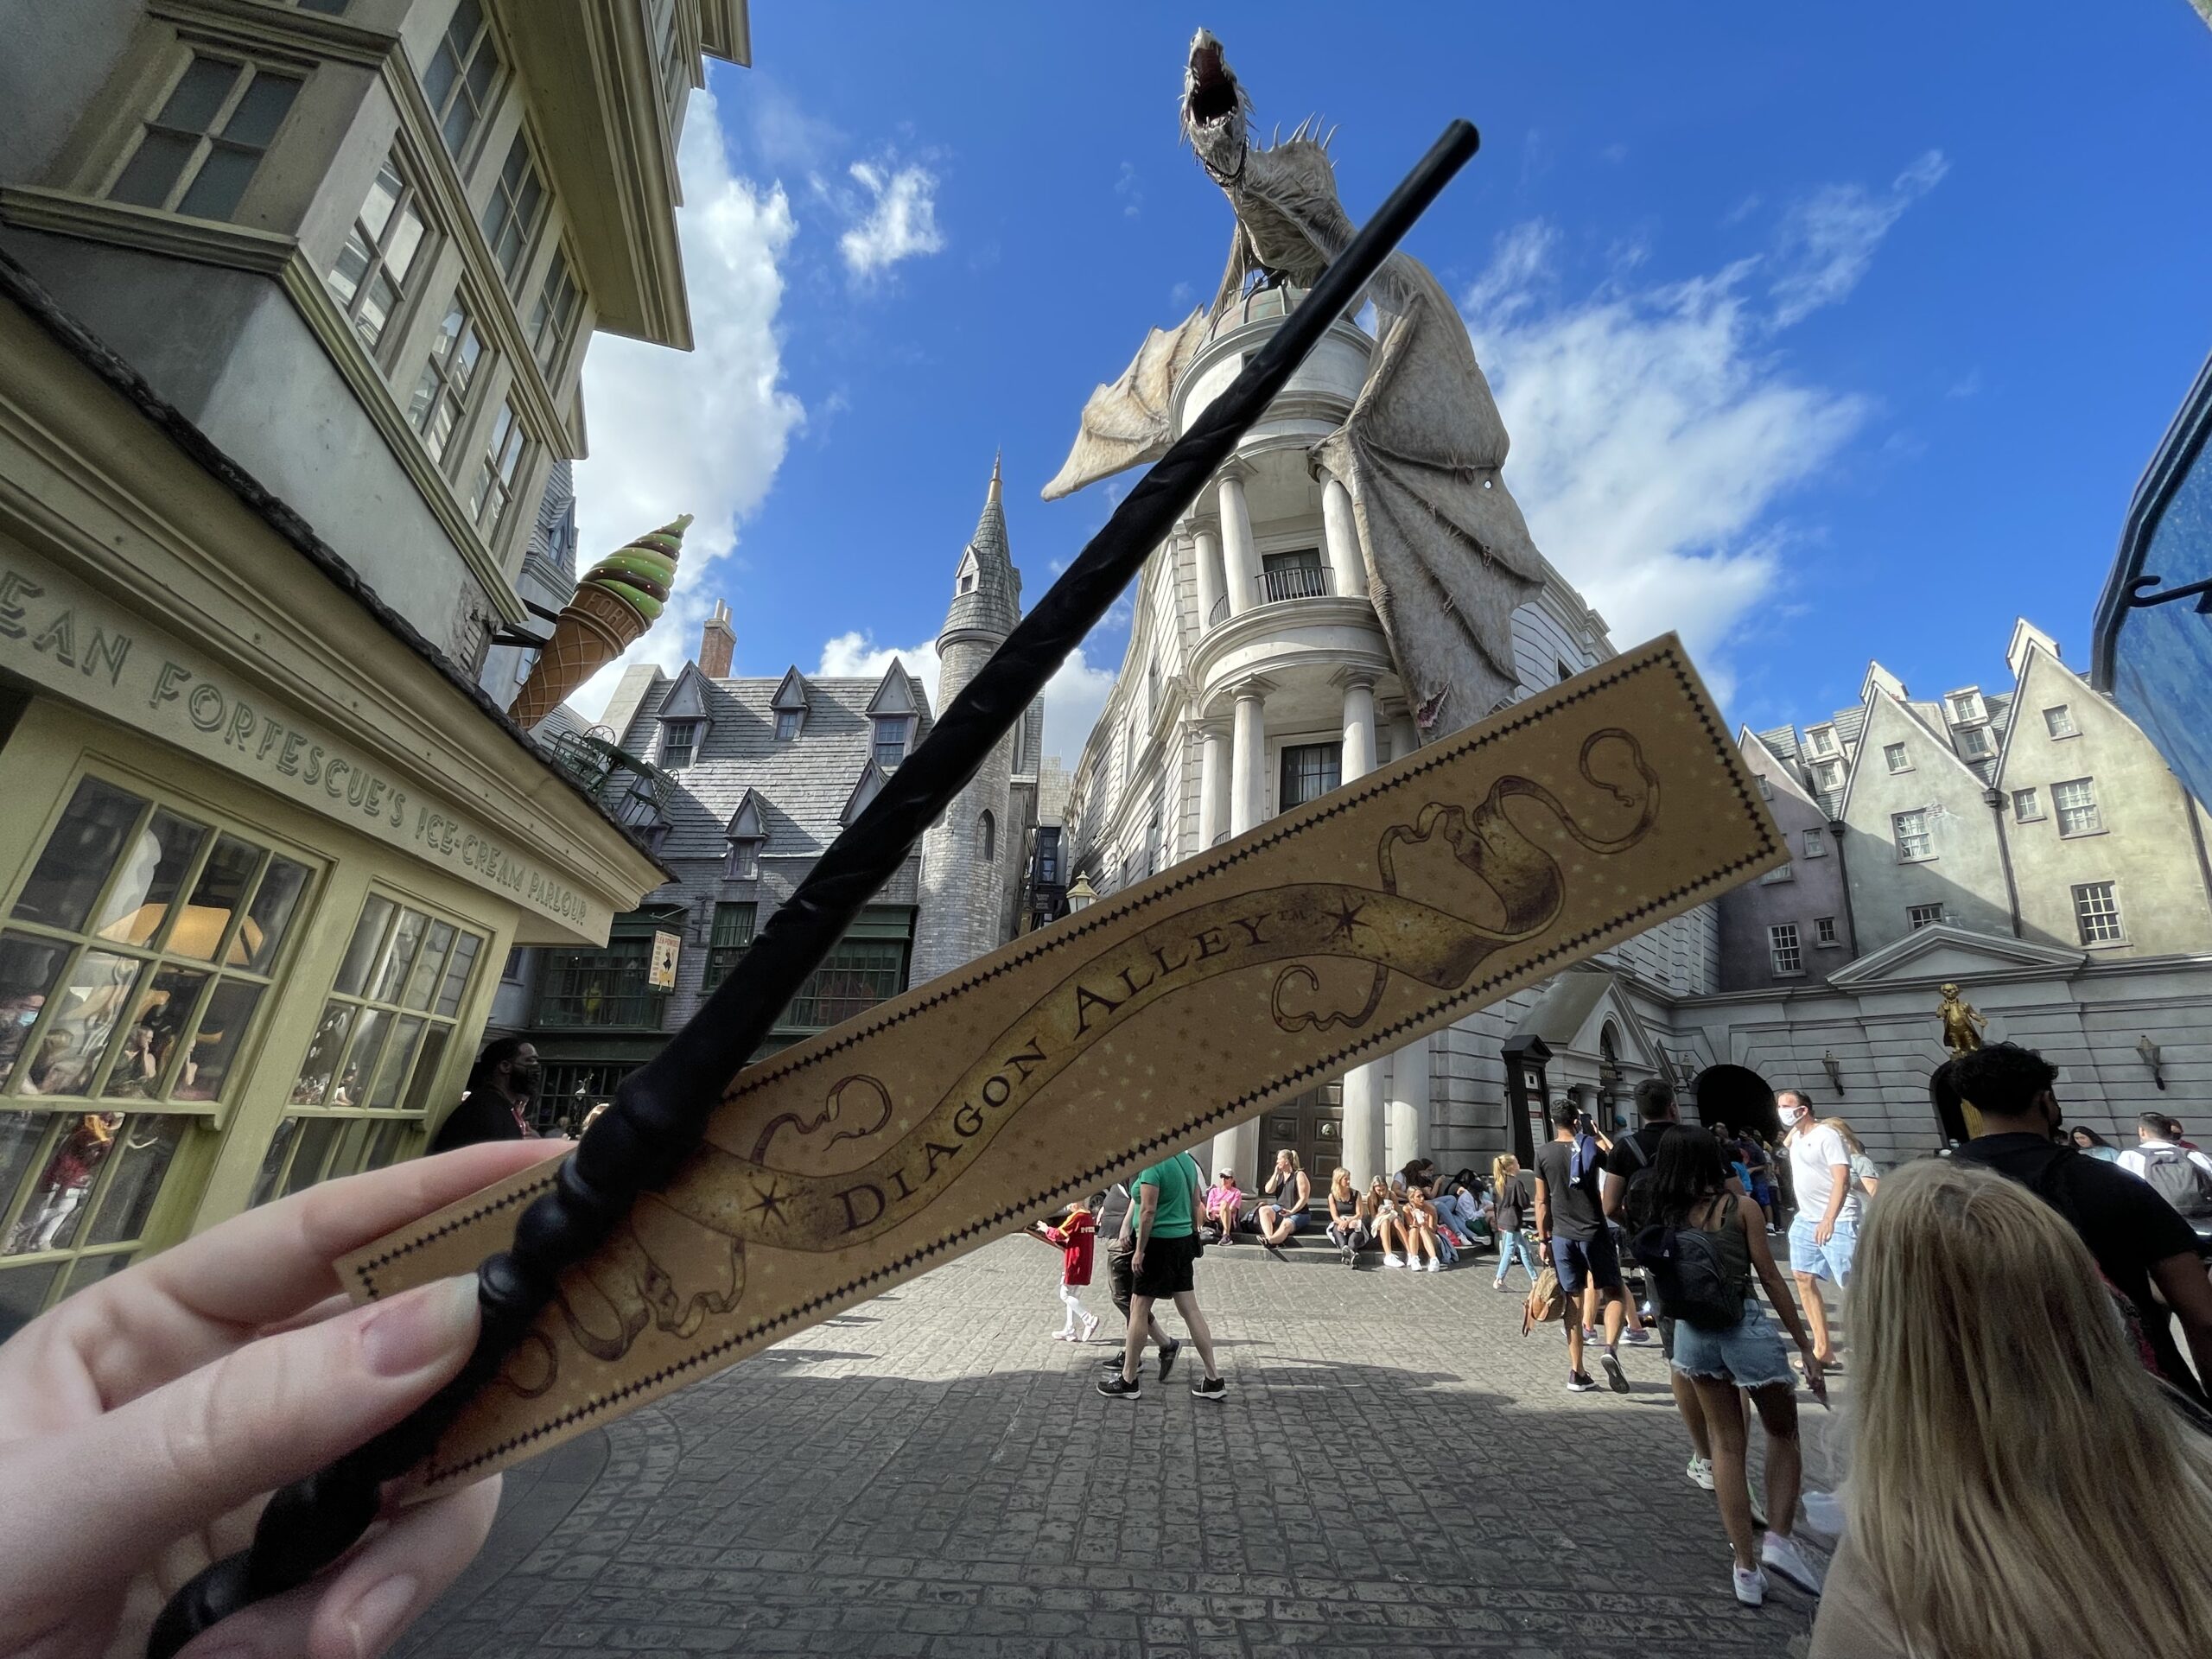 Wand Experience. 10 Things you MUST do at Universal Orlando! Learn about rides and attractions you can't miss! What's new and coming soon at the Wizarding World of Harry Potter and more with family vacation and travel tips. LivingLocurto.com